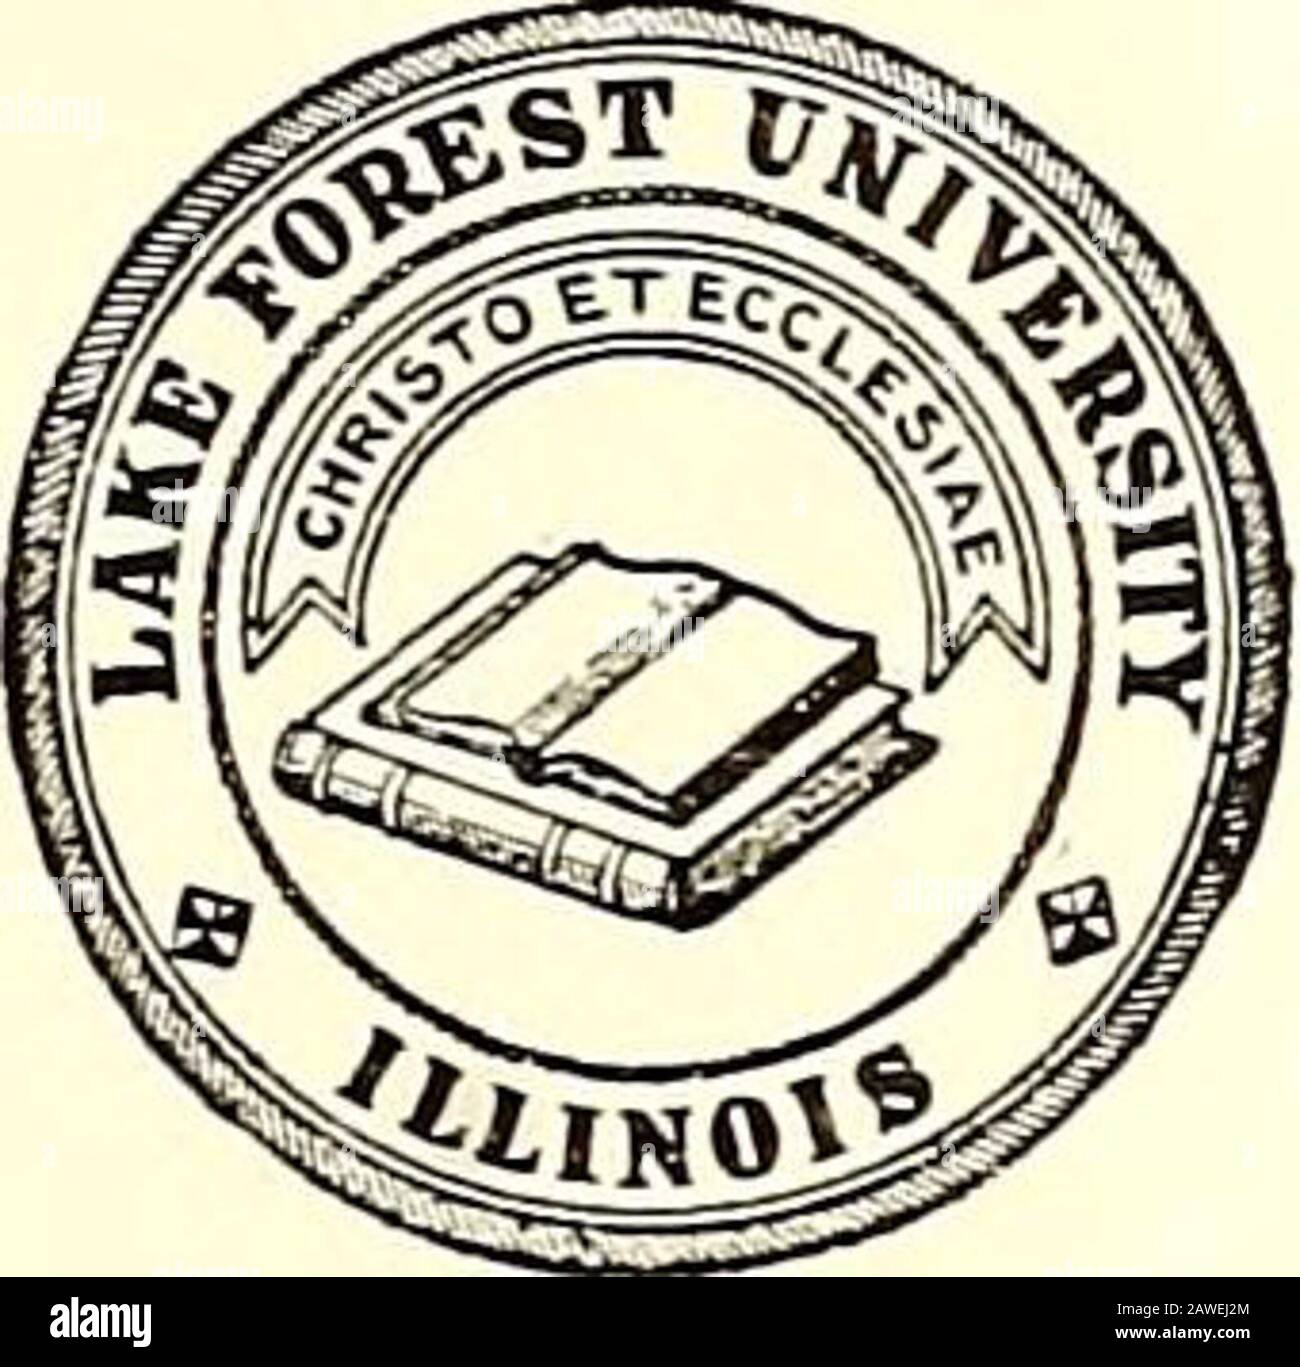 Lake Forest College stentor . Tte Stentoh LAKE FOREST COLLEGE. Vol. 19. No. 30. June 22, 05 BENJ. L. AMES, President -r -ti-ie: AMES GIFT BOND for Hats, Gaps, Gloves,Canes or Umbrellas, An appropriate anduseful Holiday Present Established 1873 AMES NOTED HATS S2 AND S3 161-163 E. Madison St. Near LaSalle St. HENRY E. Paul, Secretary Canes Umbrellas Gloves CHICAGO, ILL- THE FISK TEACHERS AGENCIES Chicago, New York, Boston, Washington, Minneapolis, Spokane,Portland, Denver, San Francisco, Los Angeles. CHICAGO OFFICE-Suite 606, 203 Michigan Avenue Managers :—Herbert F. Fisk, Ernest E. Olp and Mar Stock Photo